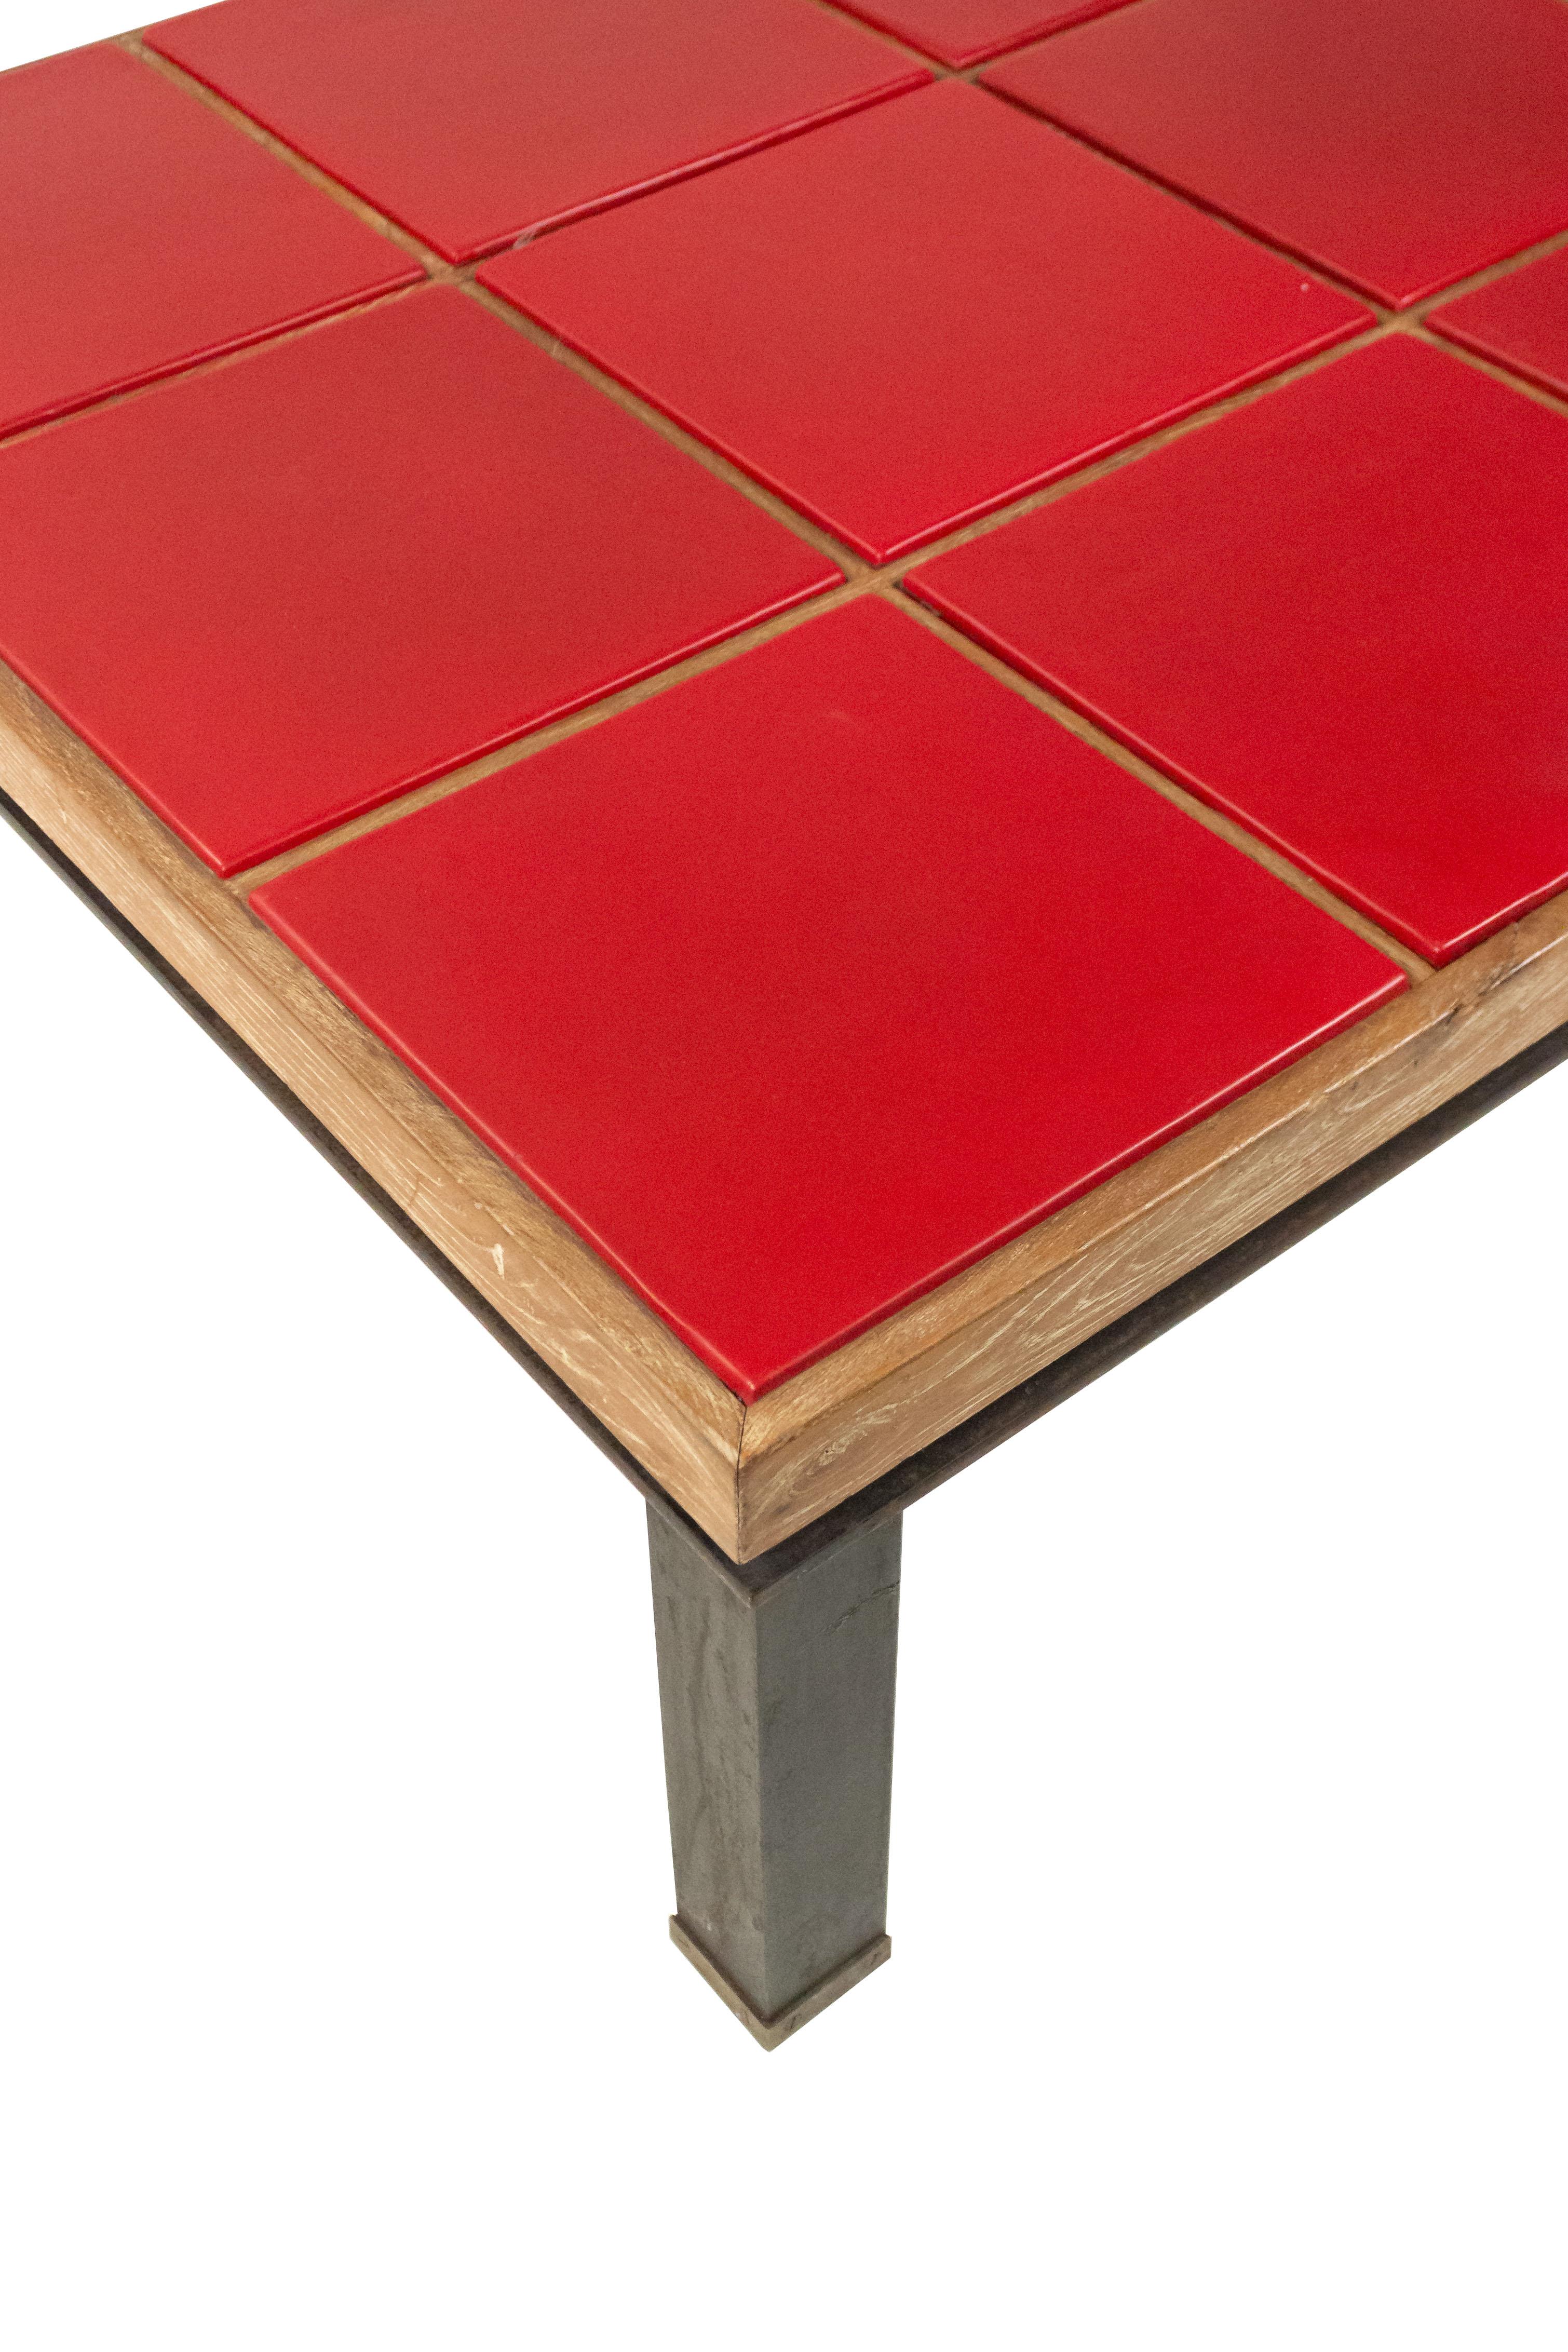 Paul Dupré-Lafon Style Midcentury Red Leather and Oak Coffee Table 2